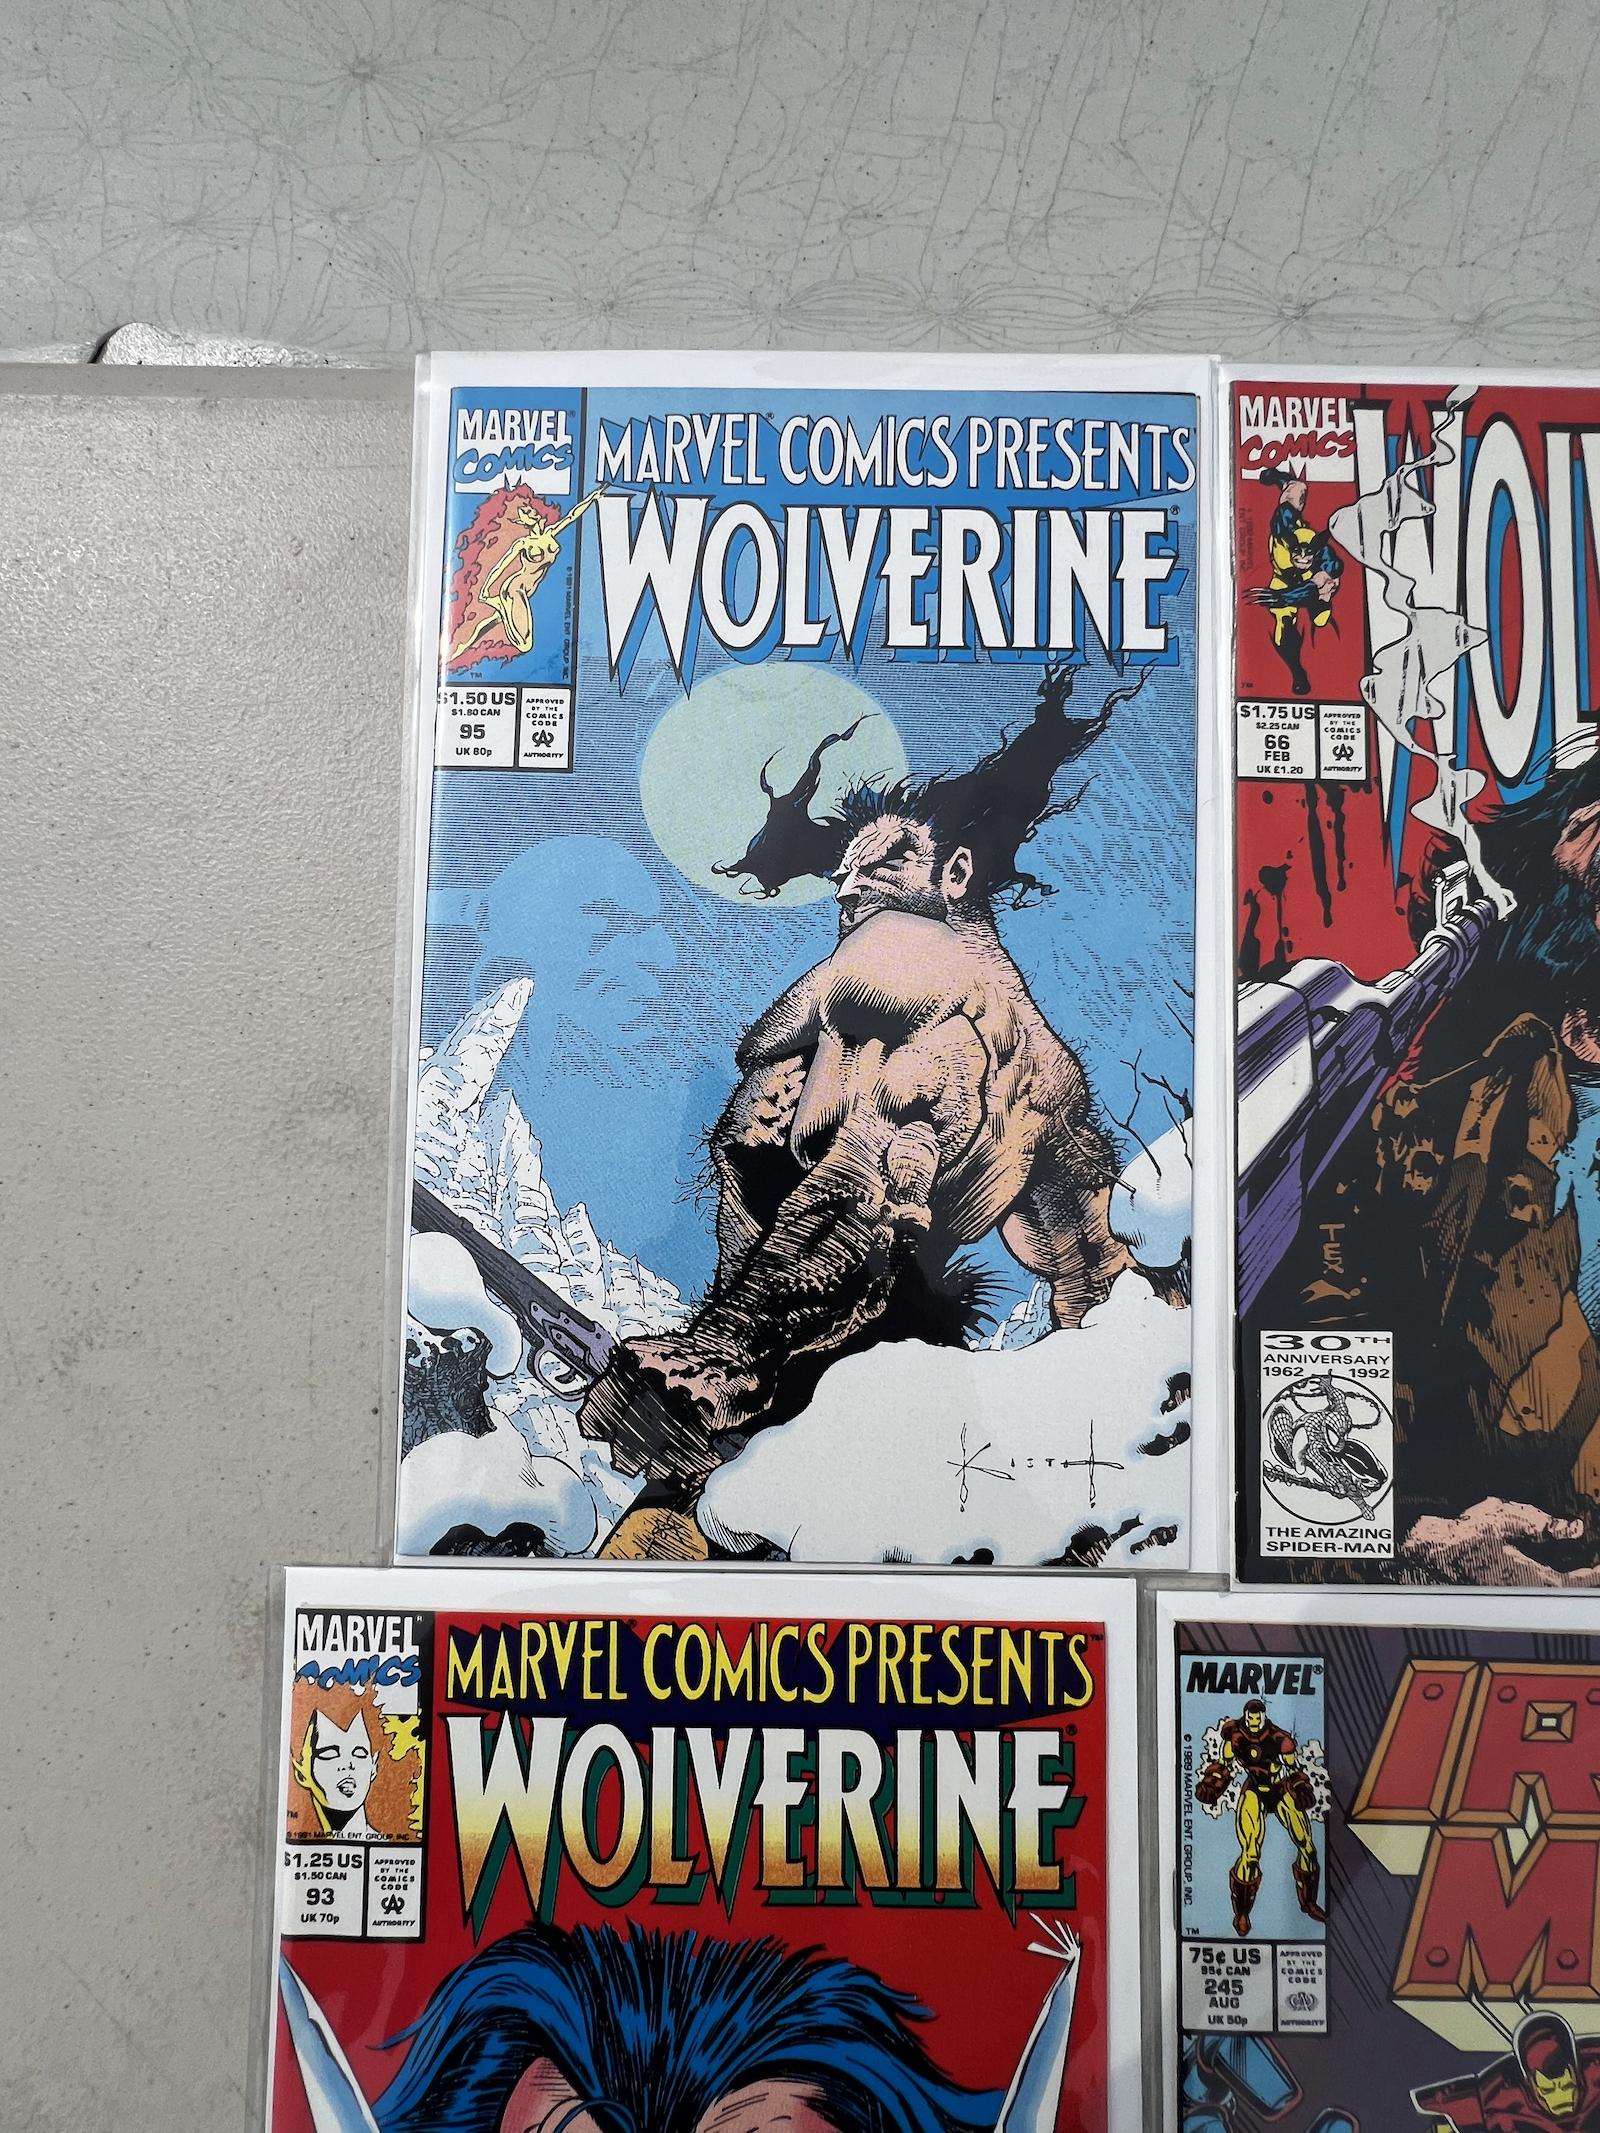 Comic Book Iron Man Wolverine Collection lot 6